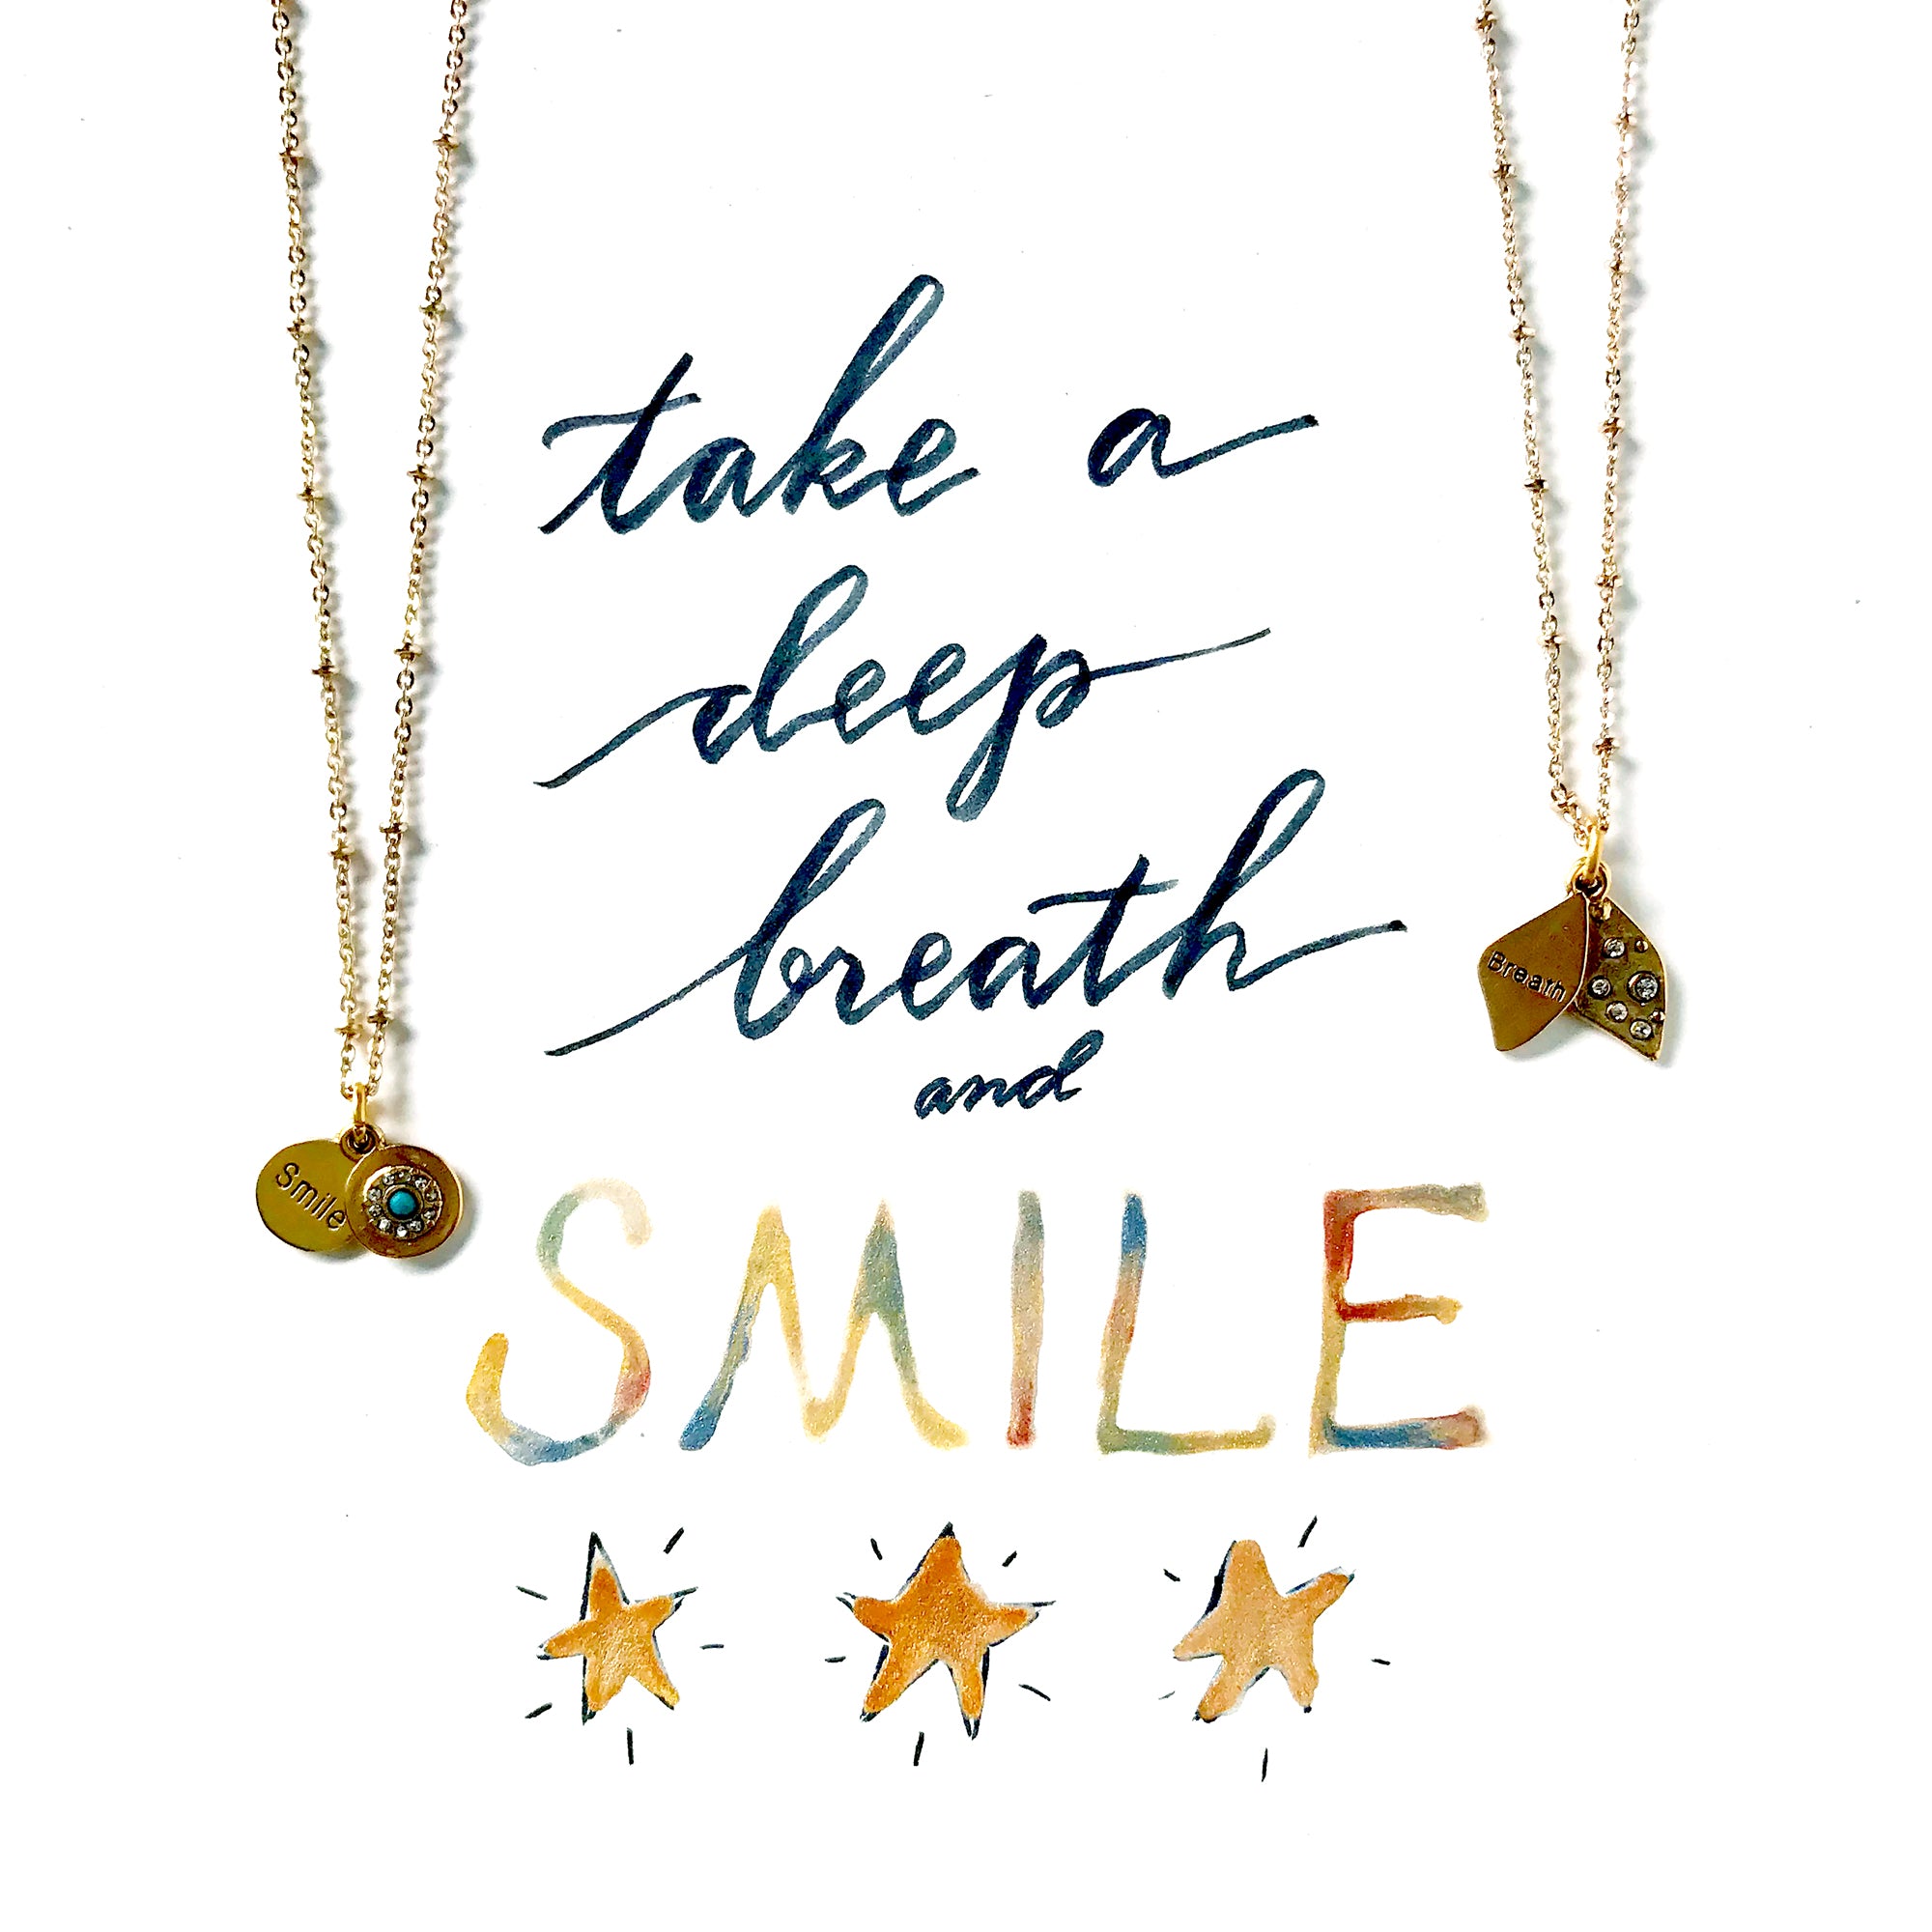 #SequinSayings - Take a deep breath and smile...